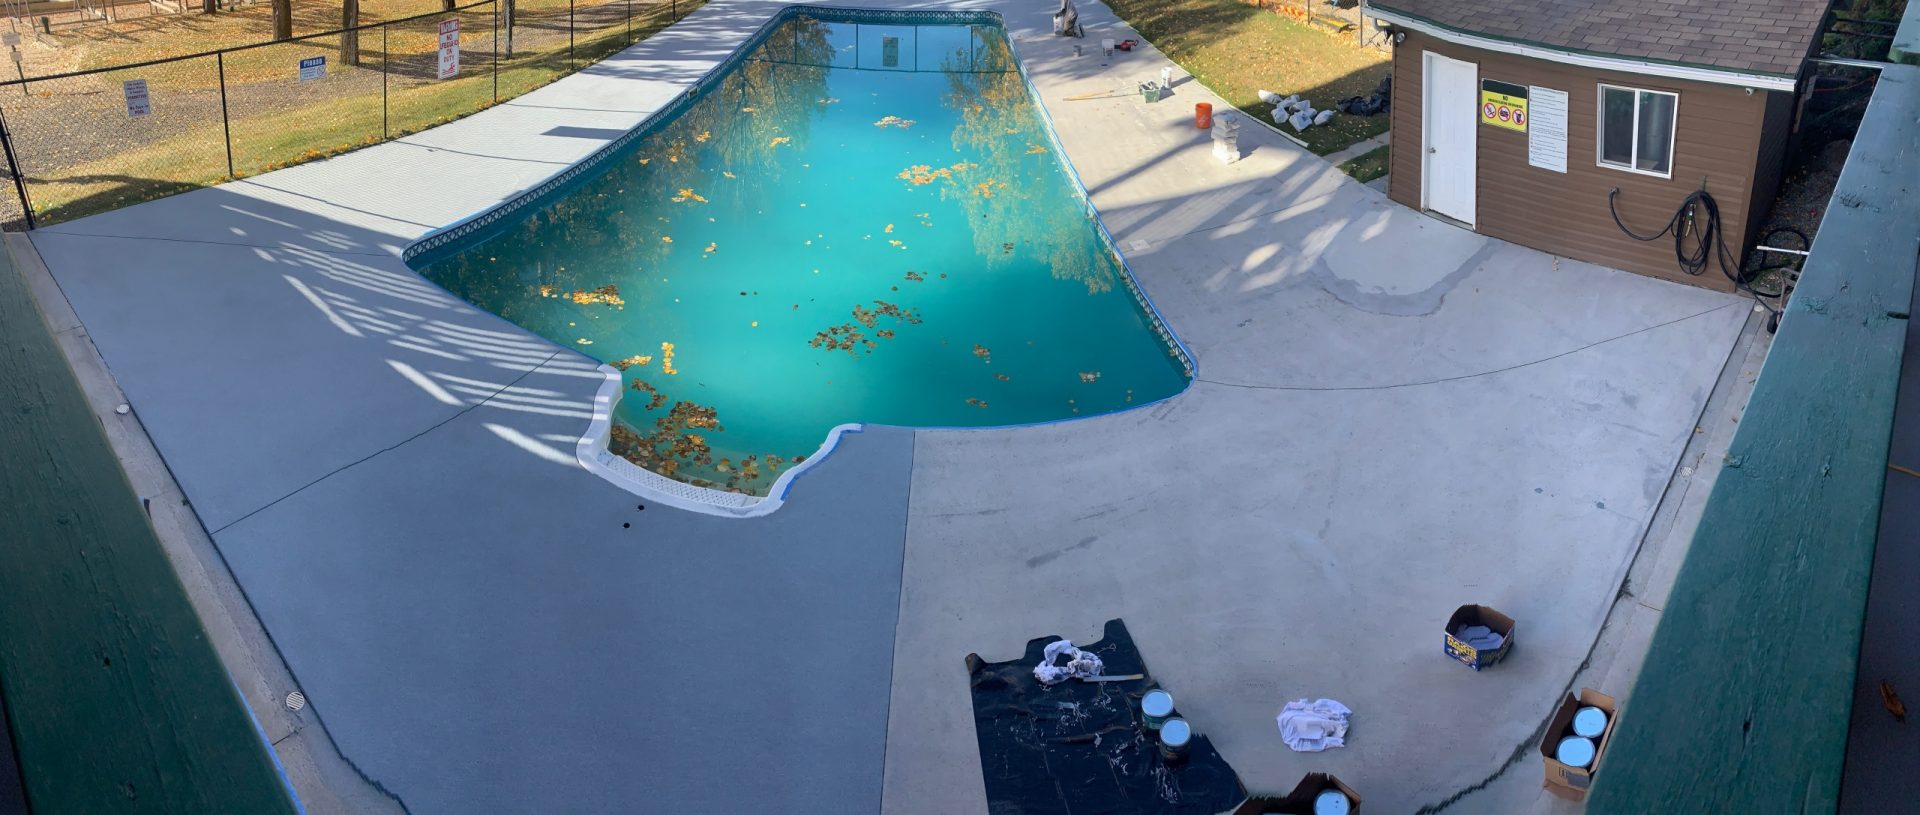 Pine Lake Leisure Campground - BTF Concrete Services - exterior pool resurface with quartz system sealed with poly aspartic. 